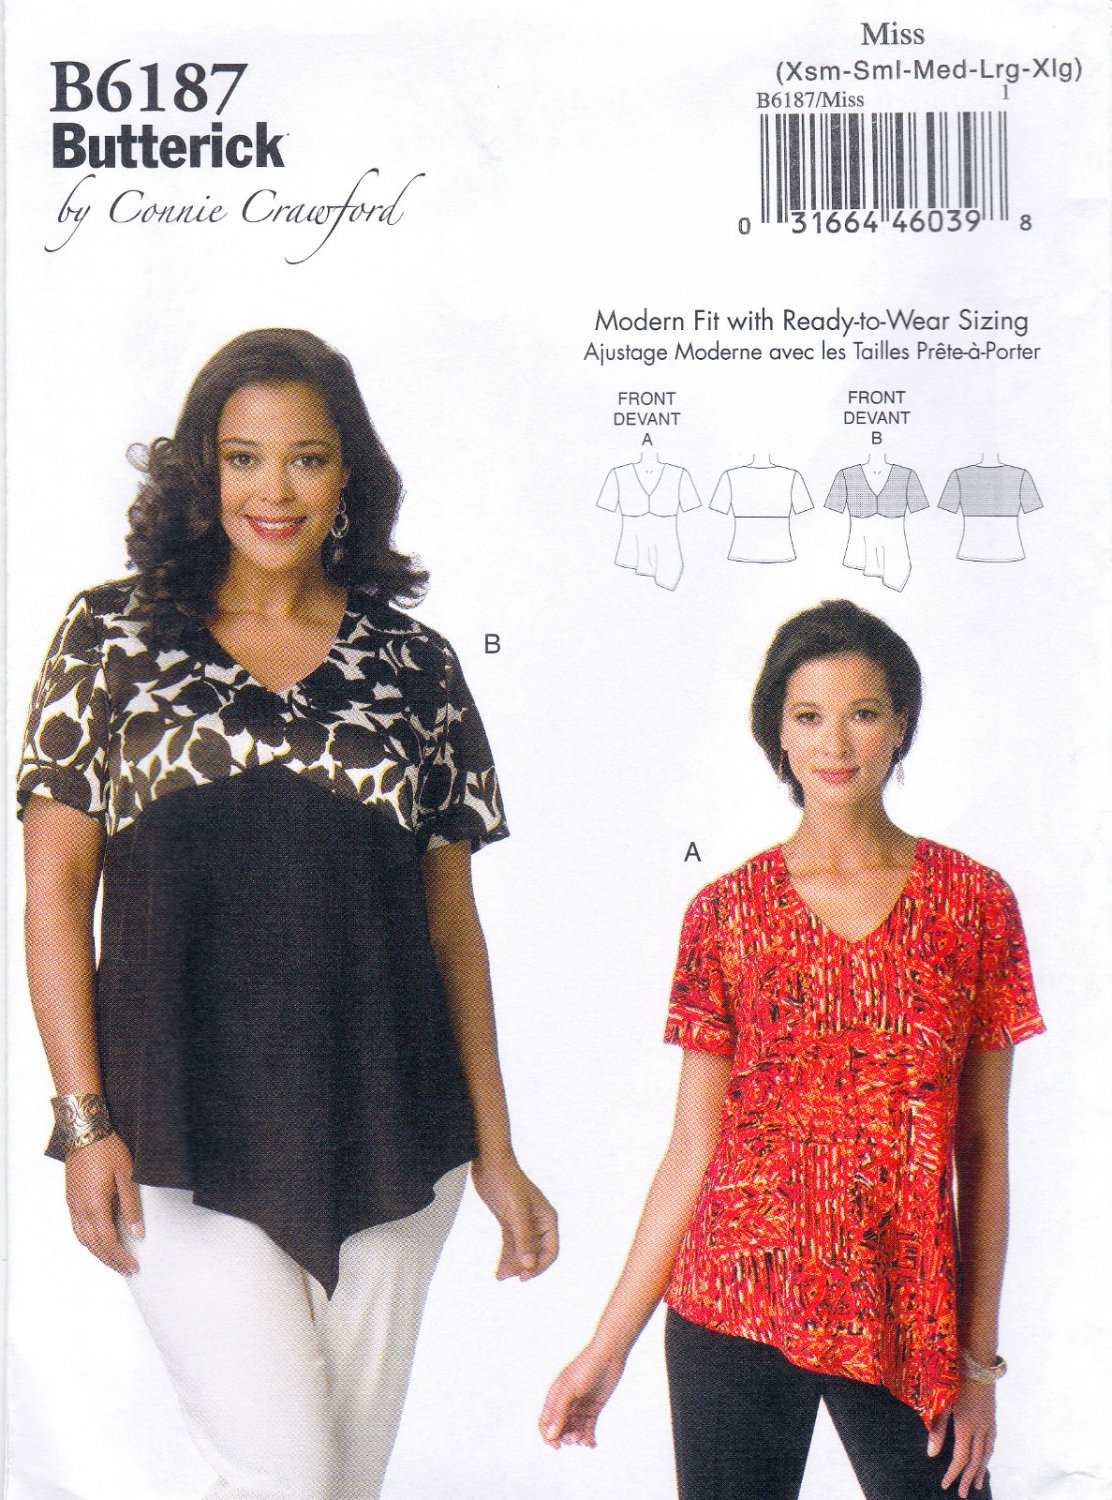 Butterick B6187 6187 Misses Pullover Tops Sewing Pattern Partially Fitted Sizes Xsm-Sml-Med-Lrg-Xlg